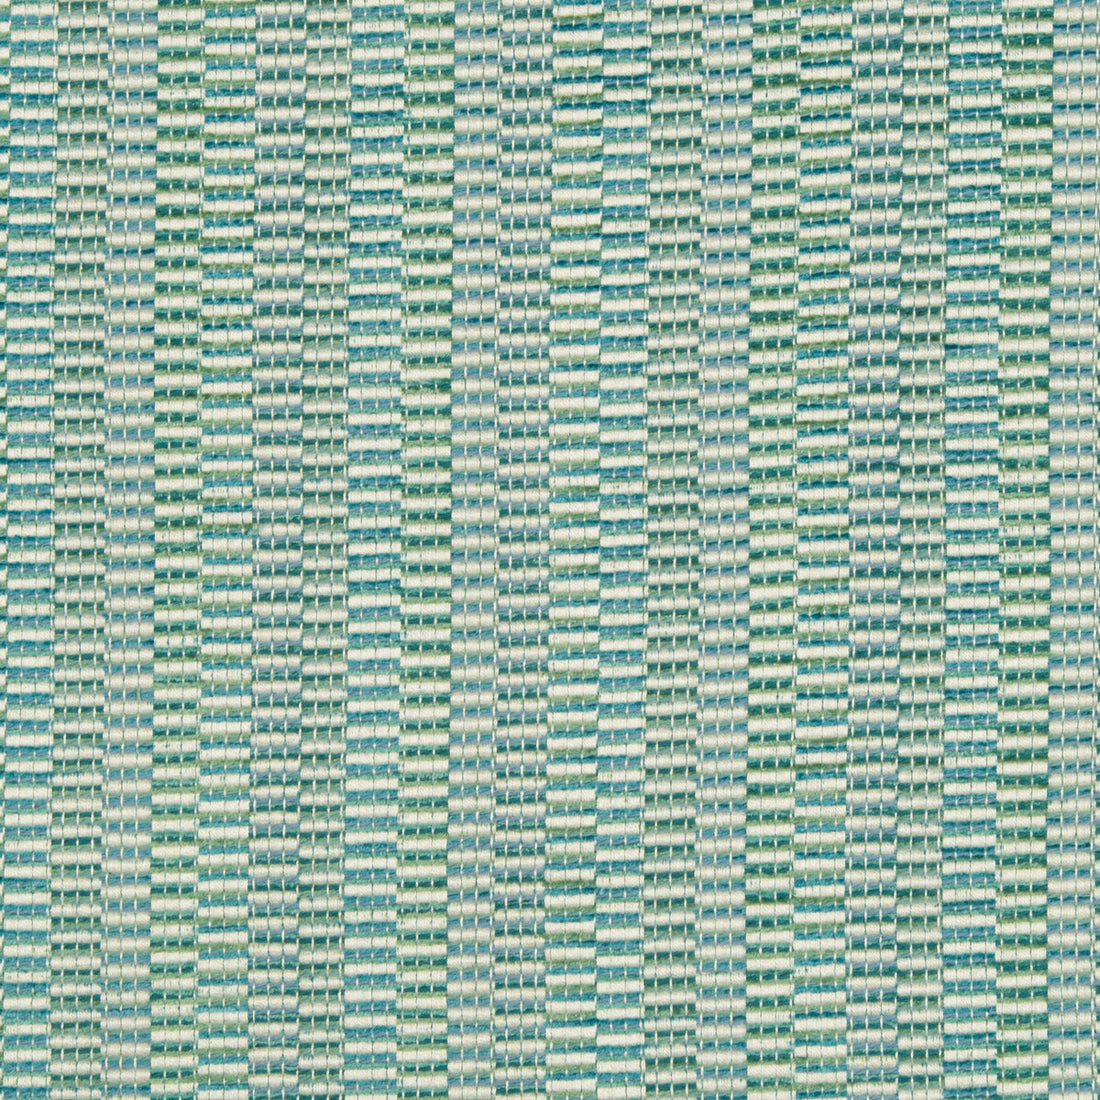 Kravet Contract fabric in 34732-1530 color - pattern 34732.1530.0 - by Kravet Contract in the Incase Crypton Gis collection